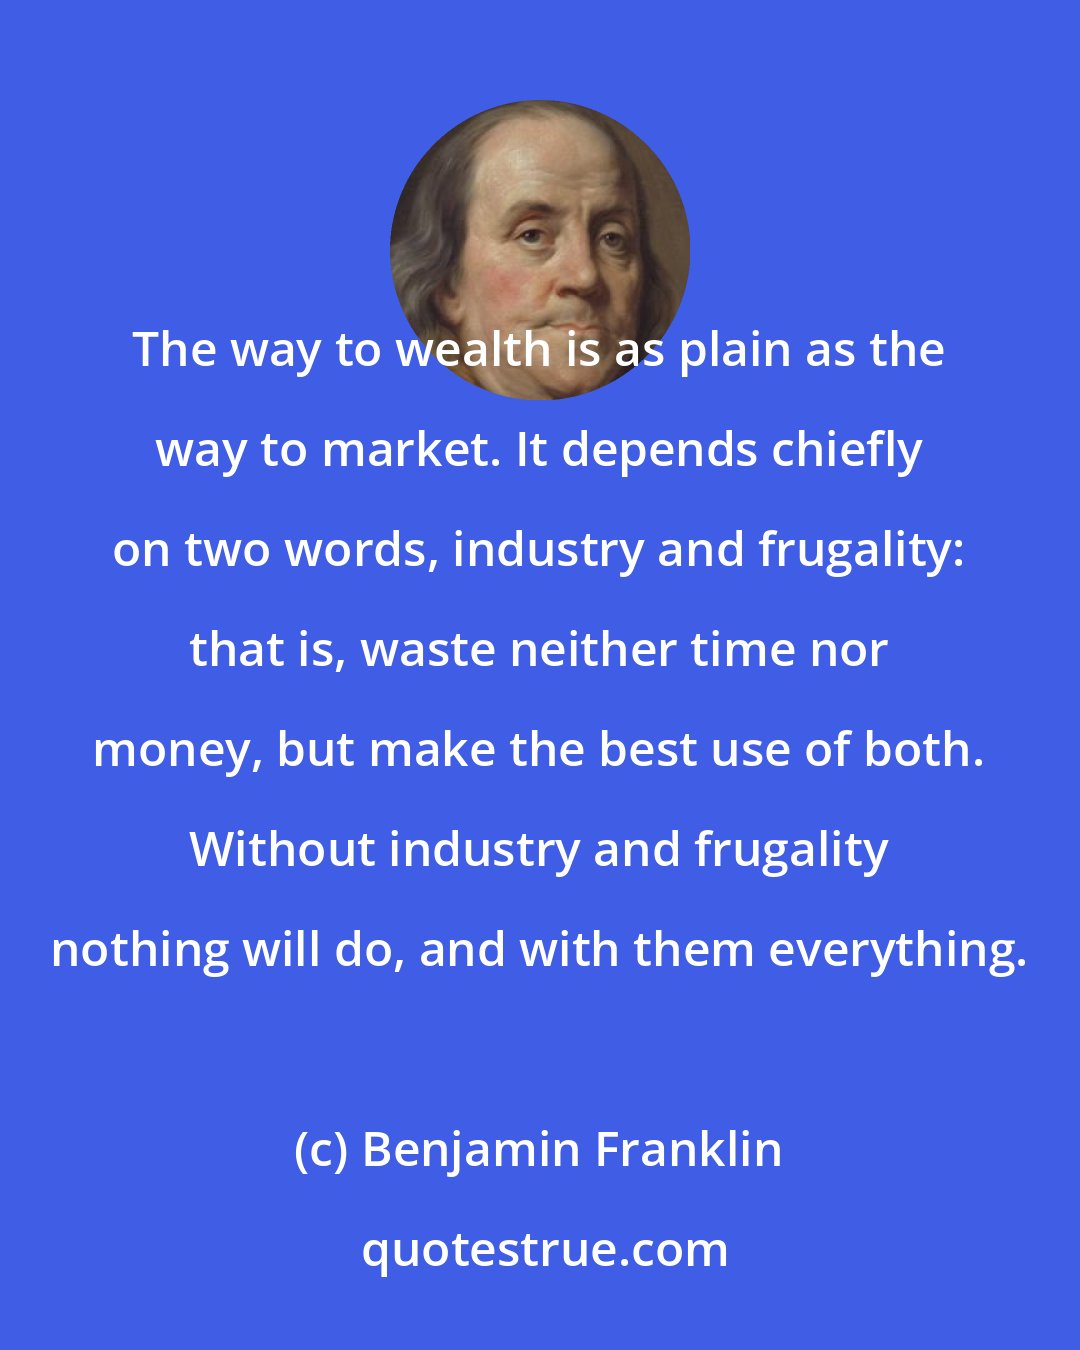 Benjamin Franklin: The way to wealth is as plain as the way to market. It depends chiefly on two words, industry and frugality: that is, waste neither time nor money, but make the best use of both. Without industry and frugality nothing will do, and with them everything.